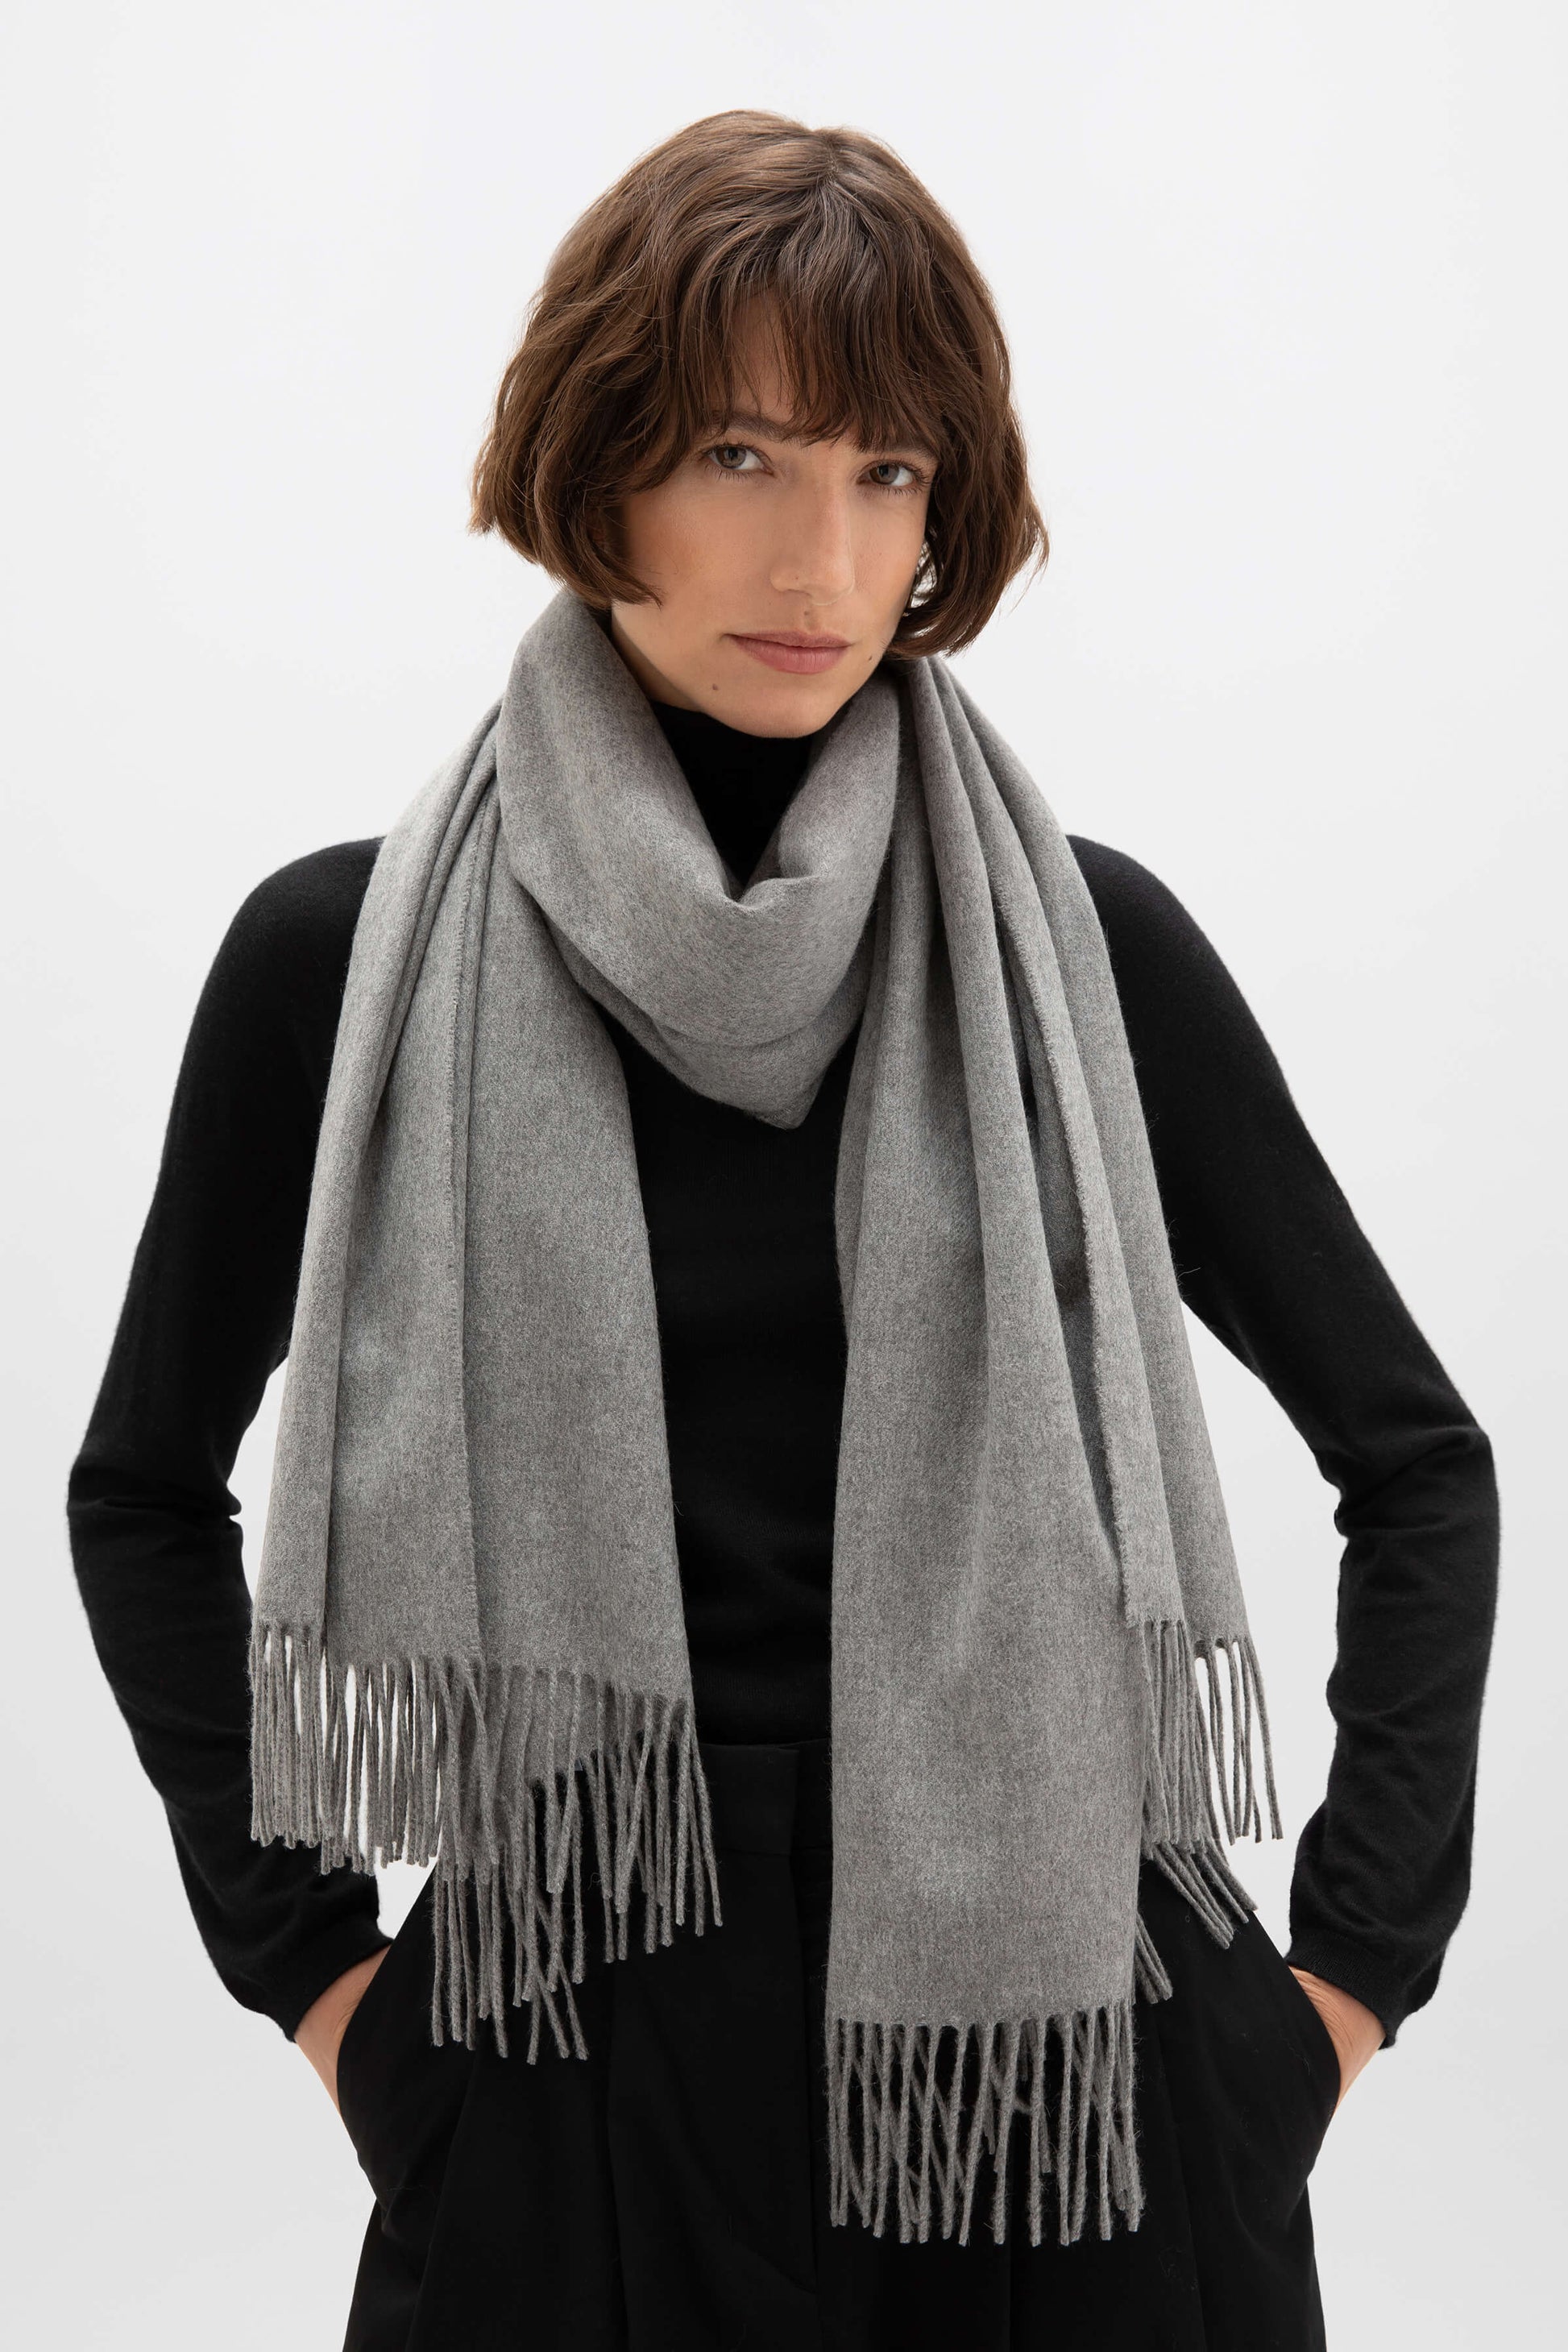 Johnstons of Elgin 100% Cashmere Stole in Mid Grey on a female model WA000056HA0501N/A